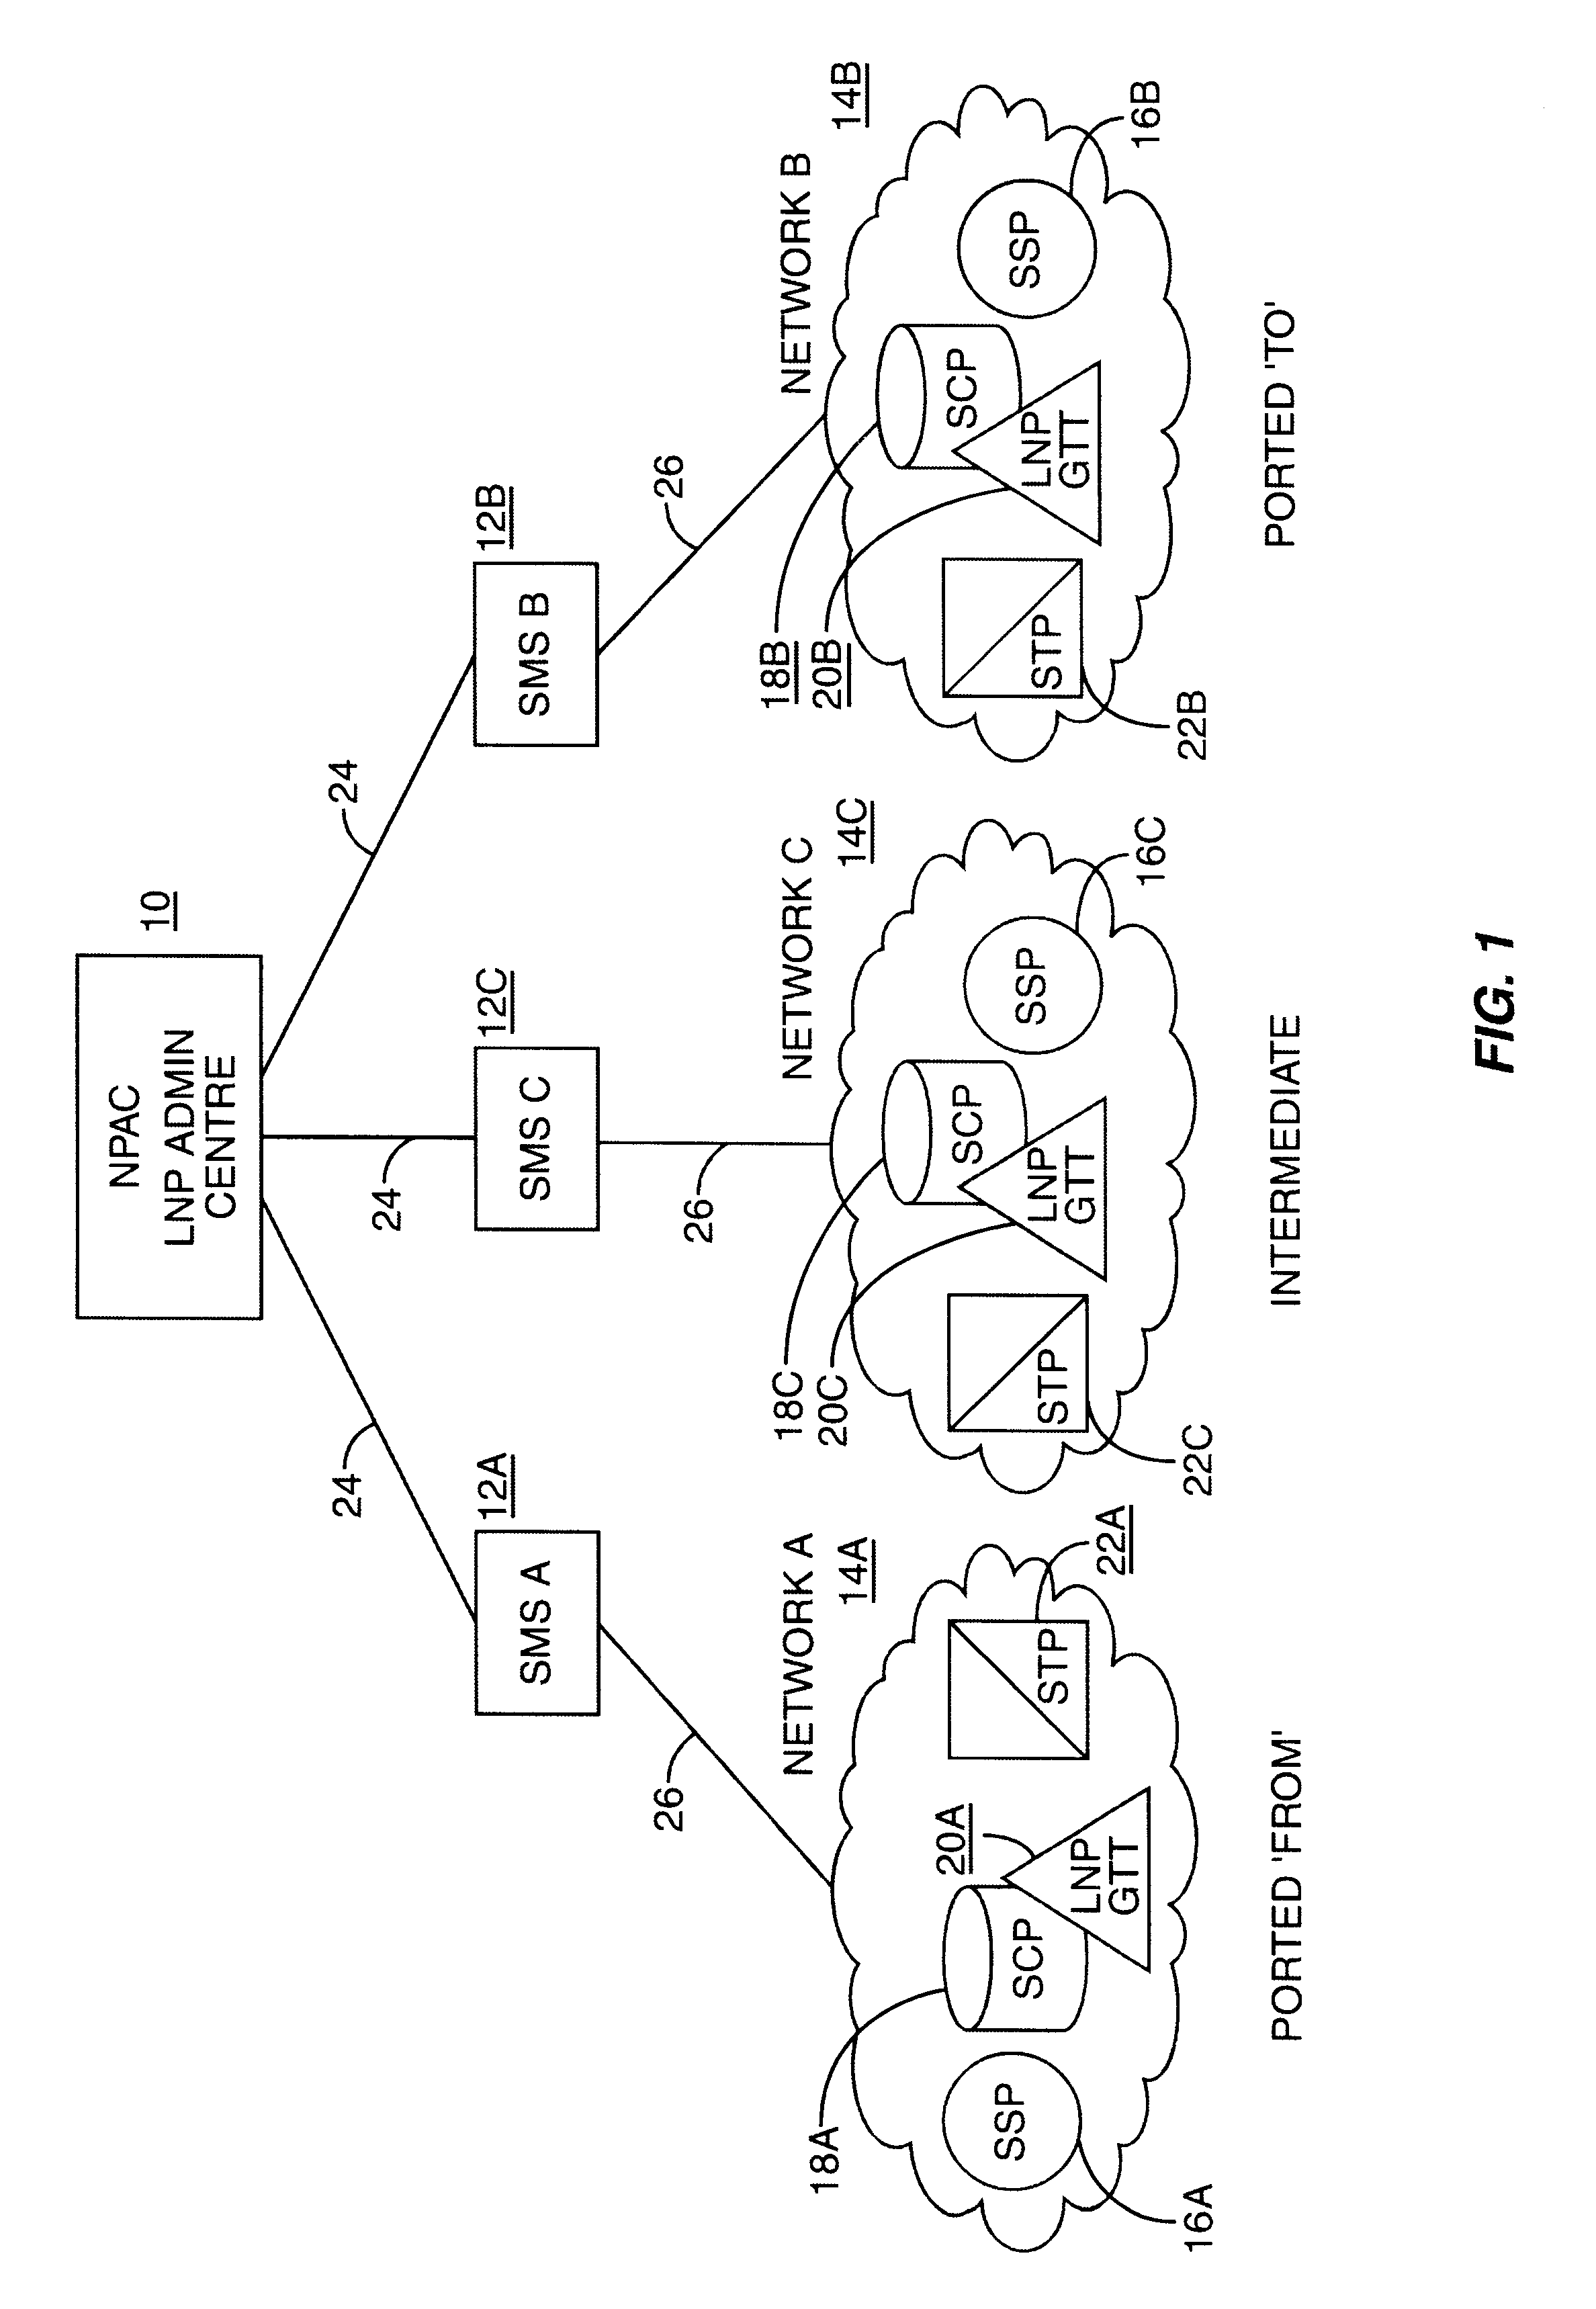 Method of provisioning nodes within a communications network